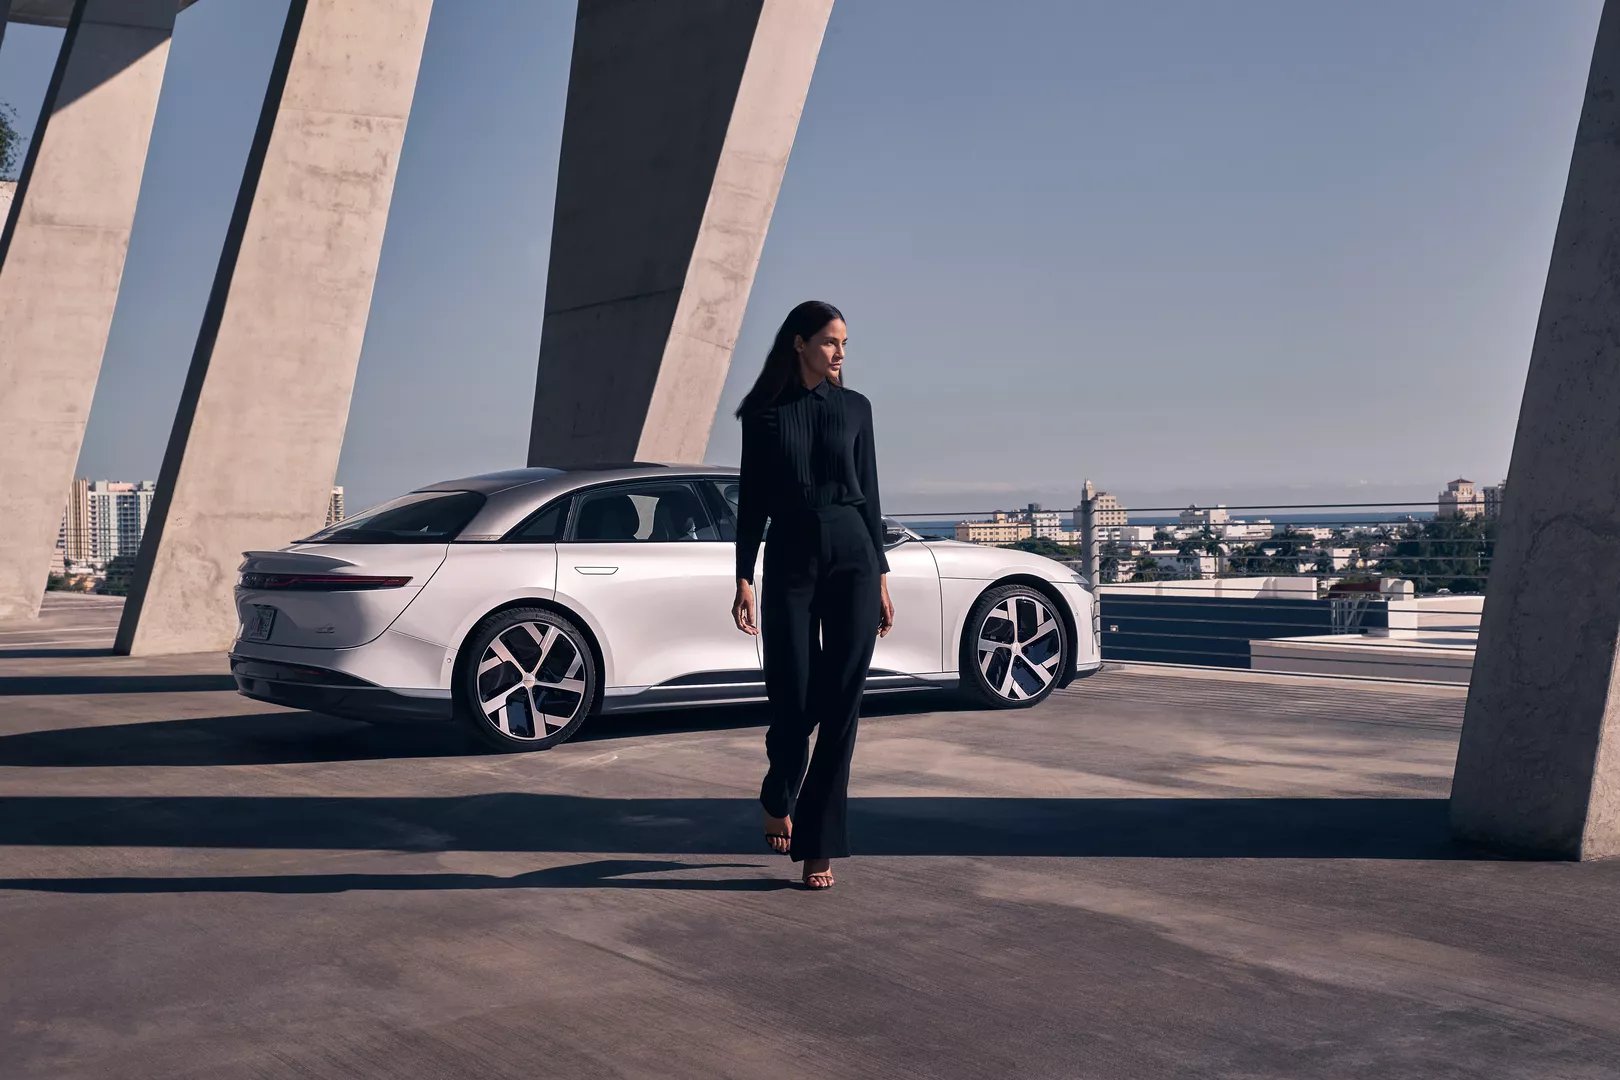 A woman is walking towards the camera in front of a stellar white Lucid Air Dream Edition. The car is parked under a modern concrete structure. In the background, there are buildings and a think sliver of ocean.